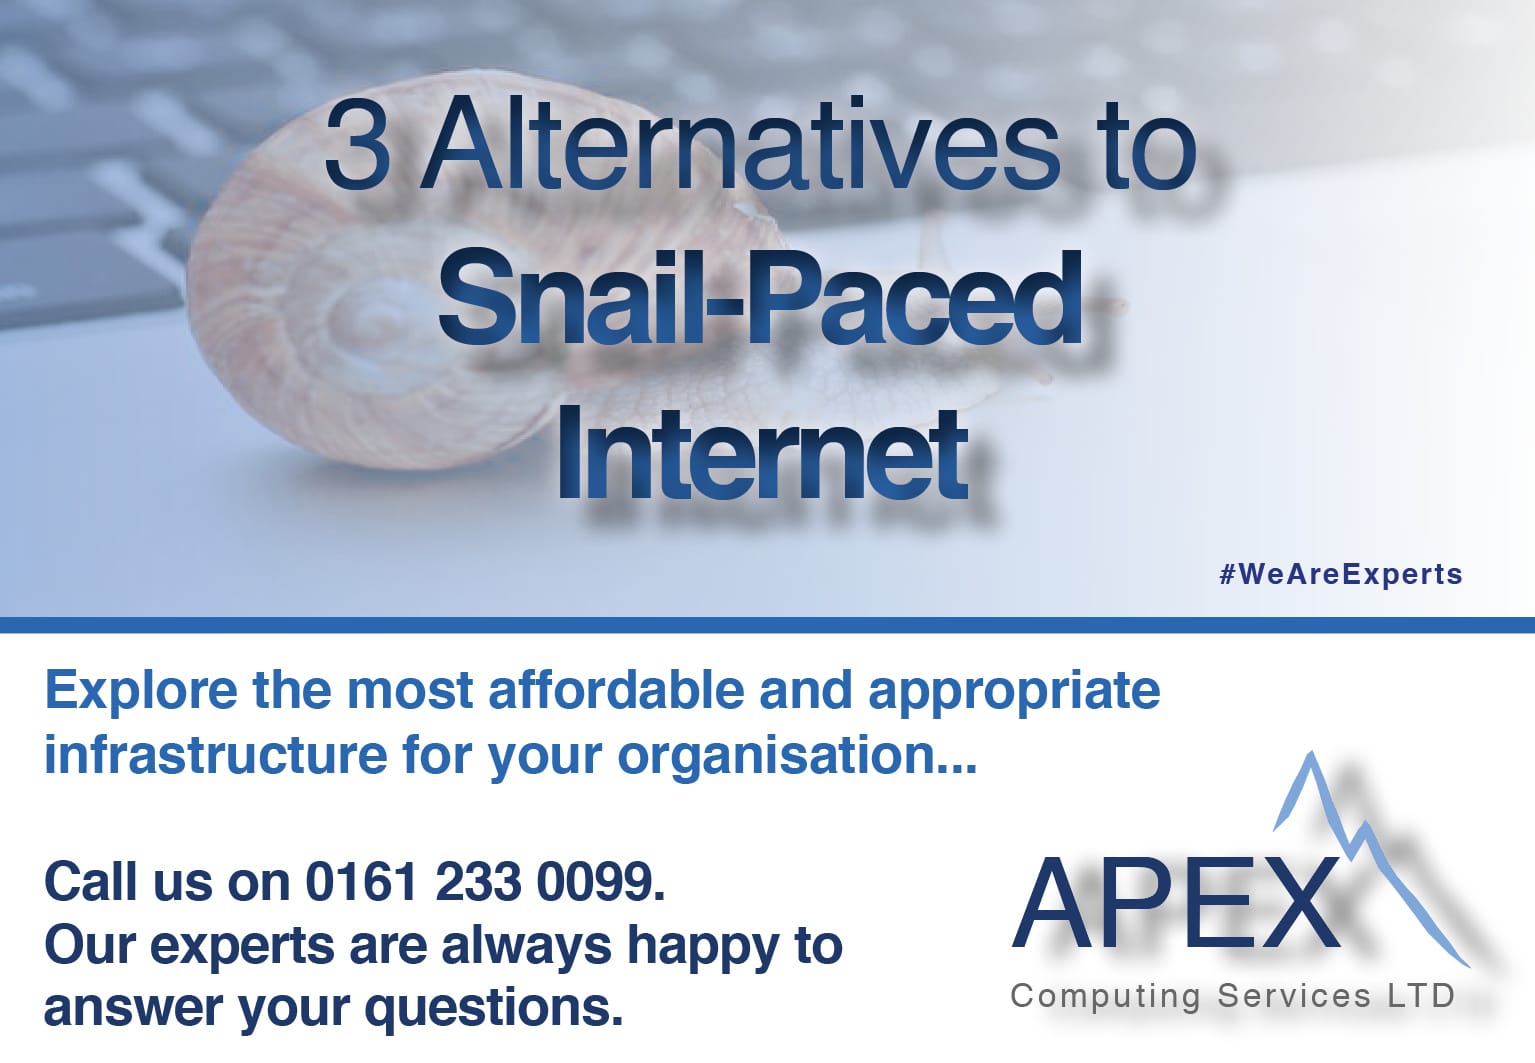 3 Alternatives to Snail-Paced Internet